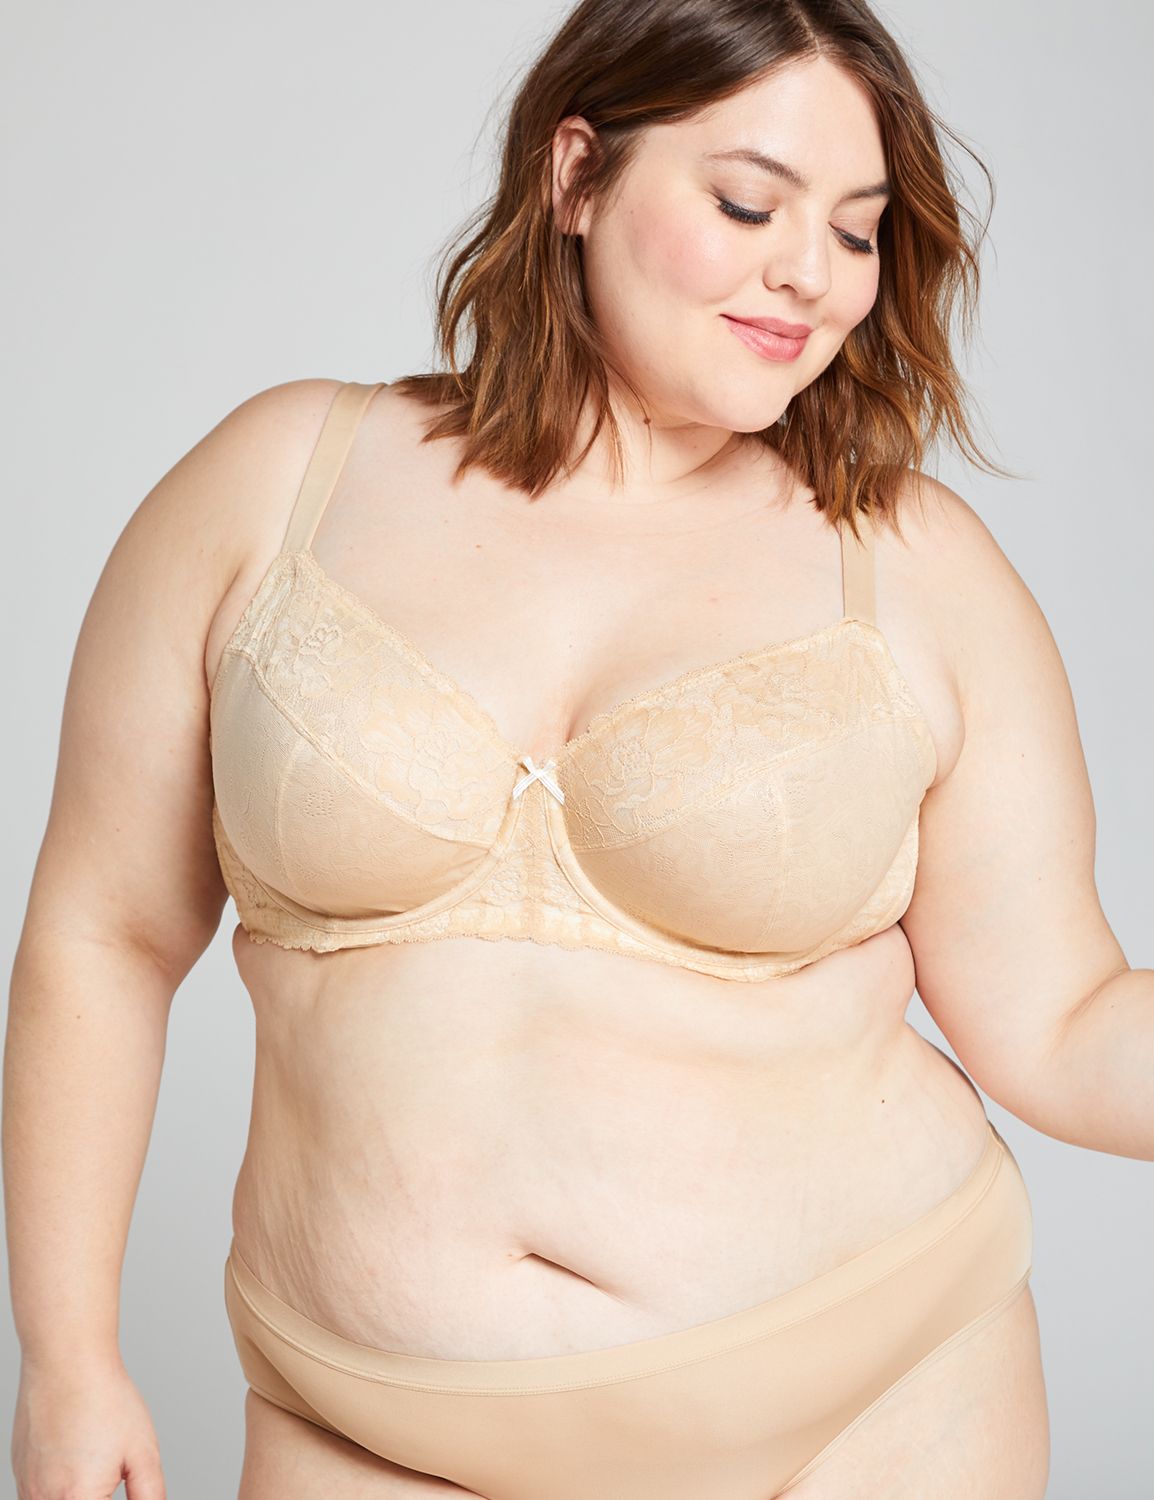 Lace Unlined Full Coverage Bra1130026:Cafe Mocha LBS 2365:34G